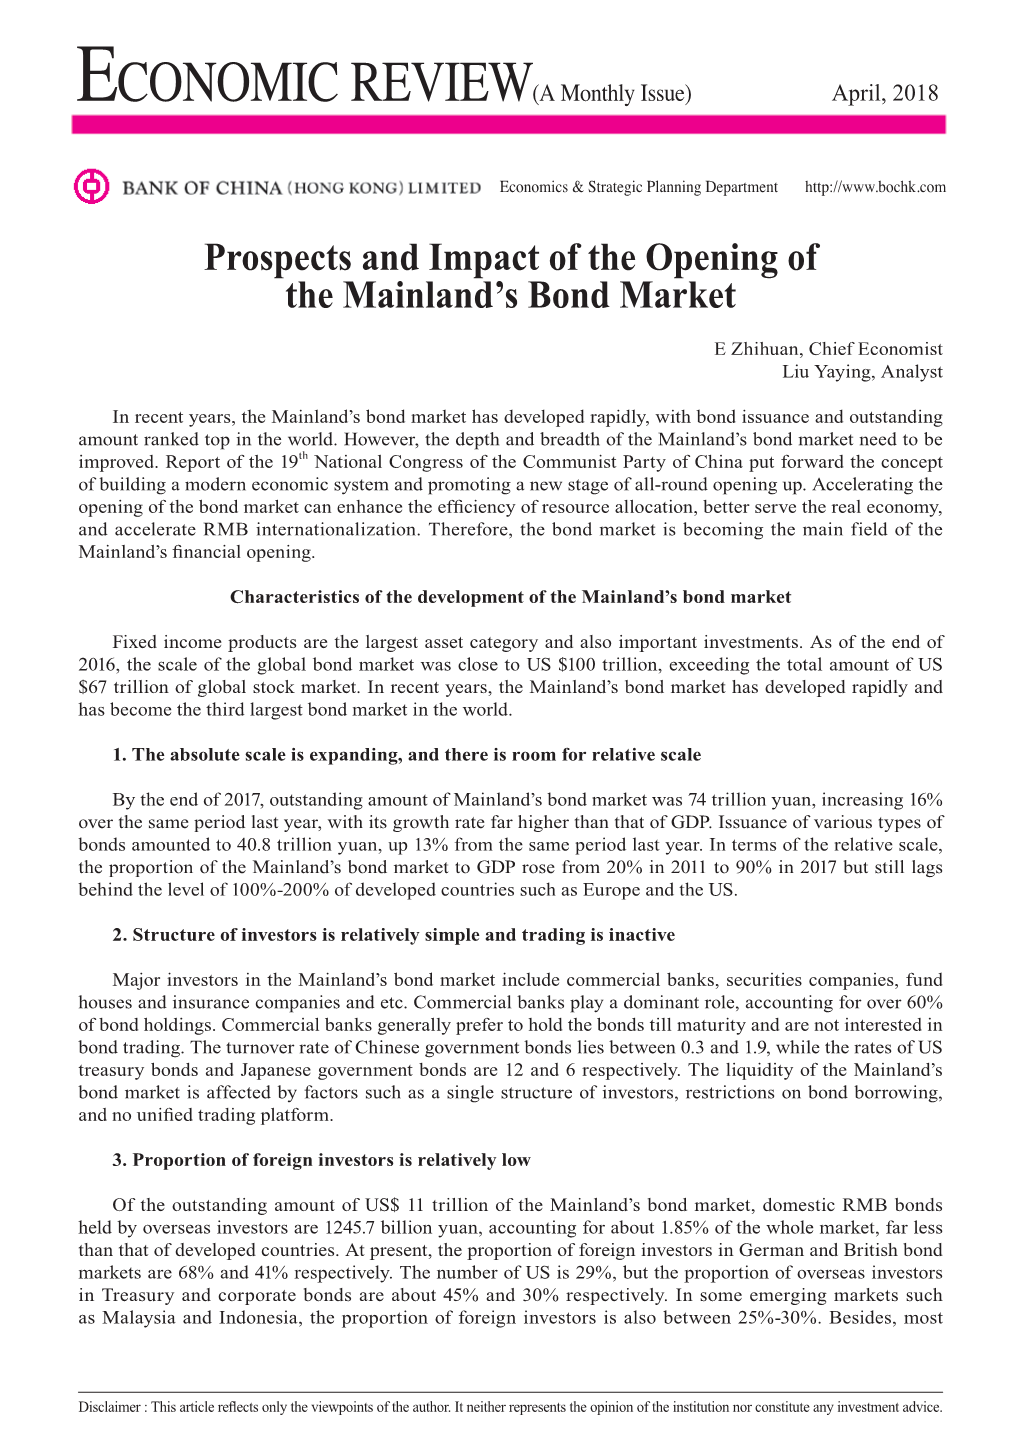 Prospects and Impact of the Opening of the Mainland's Bond Market The